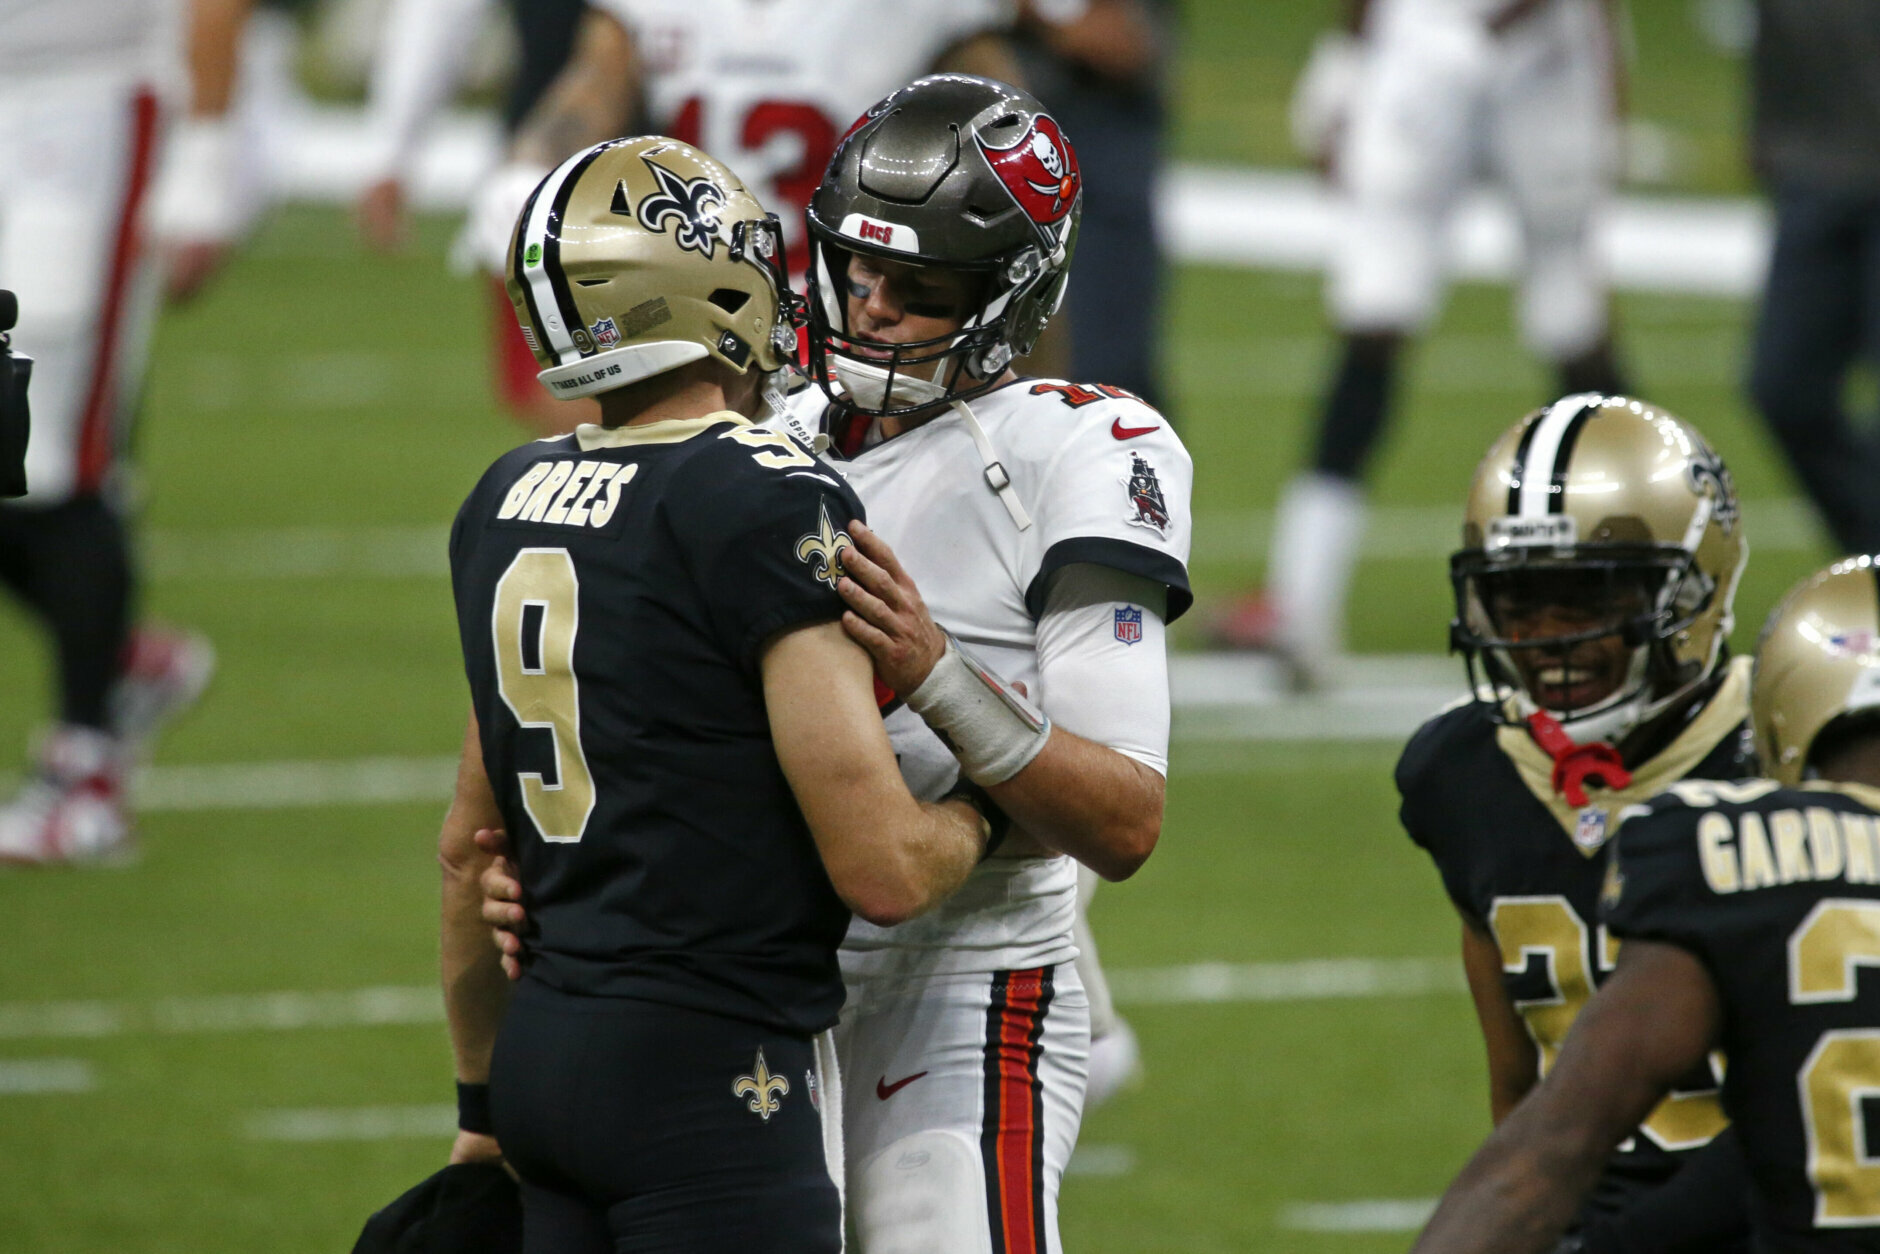 <p><b><i>Bucs 23</i></b><br />
<b><i>Saints 34</i></b></p>
<p>In the NFL&#8217;s first matchup of 40-year-old starting quarterbacks, Drew Brees and Tom Brady both looked their ages, but <a href="https://profootballtalk.nbcsports.com/2020/09/13/drew-brees-breaks-career-pass-attempts-record/">Brees broke another record</a> to help ruin Brady&#8217;s Bucs debut that should temper some of the talk of Tampa&#8217;s title hopes. <a href="https://wtop.com/gallery/nfl/2020-nfl-playoff-predictions/">There was a Super Bowl team on the field in New Orleans</a>, and it wasn&#8217;t the Bucs.</p>
